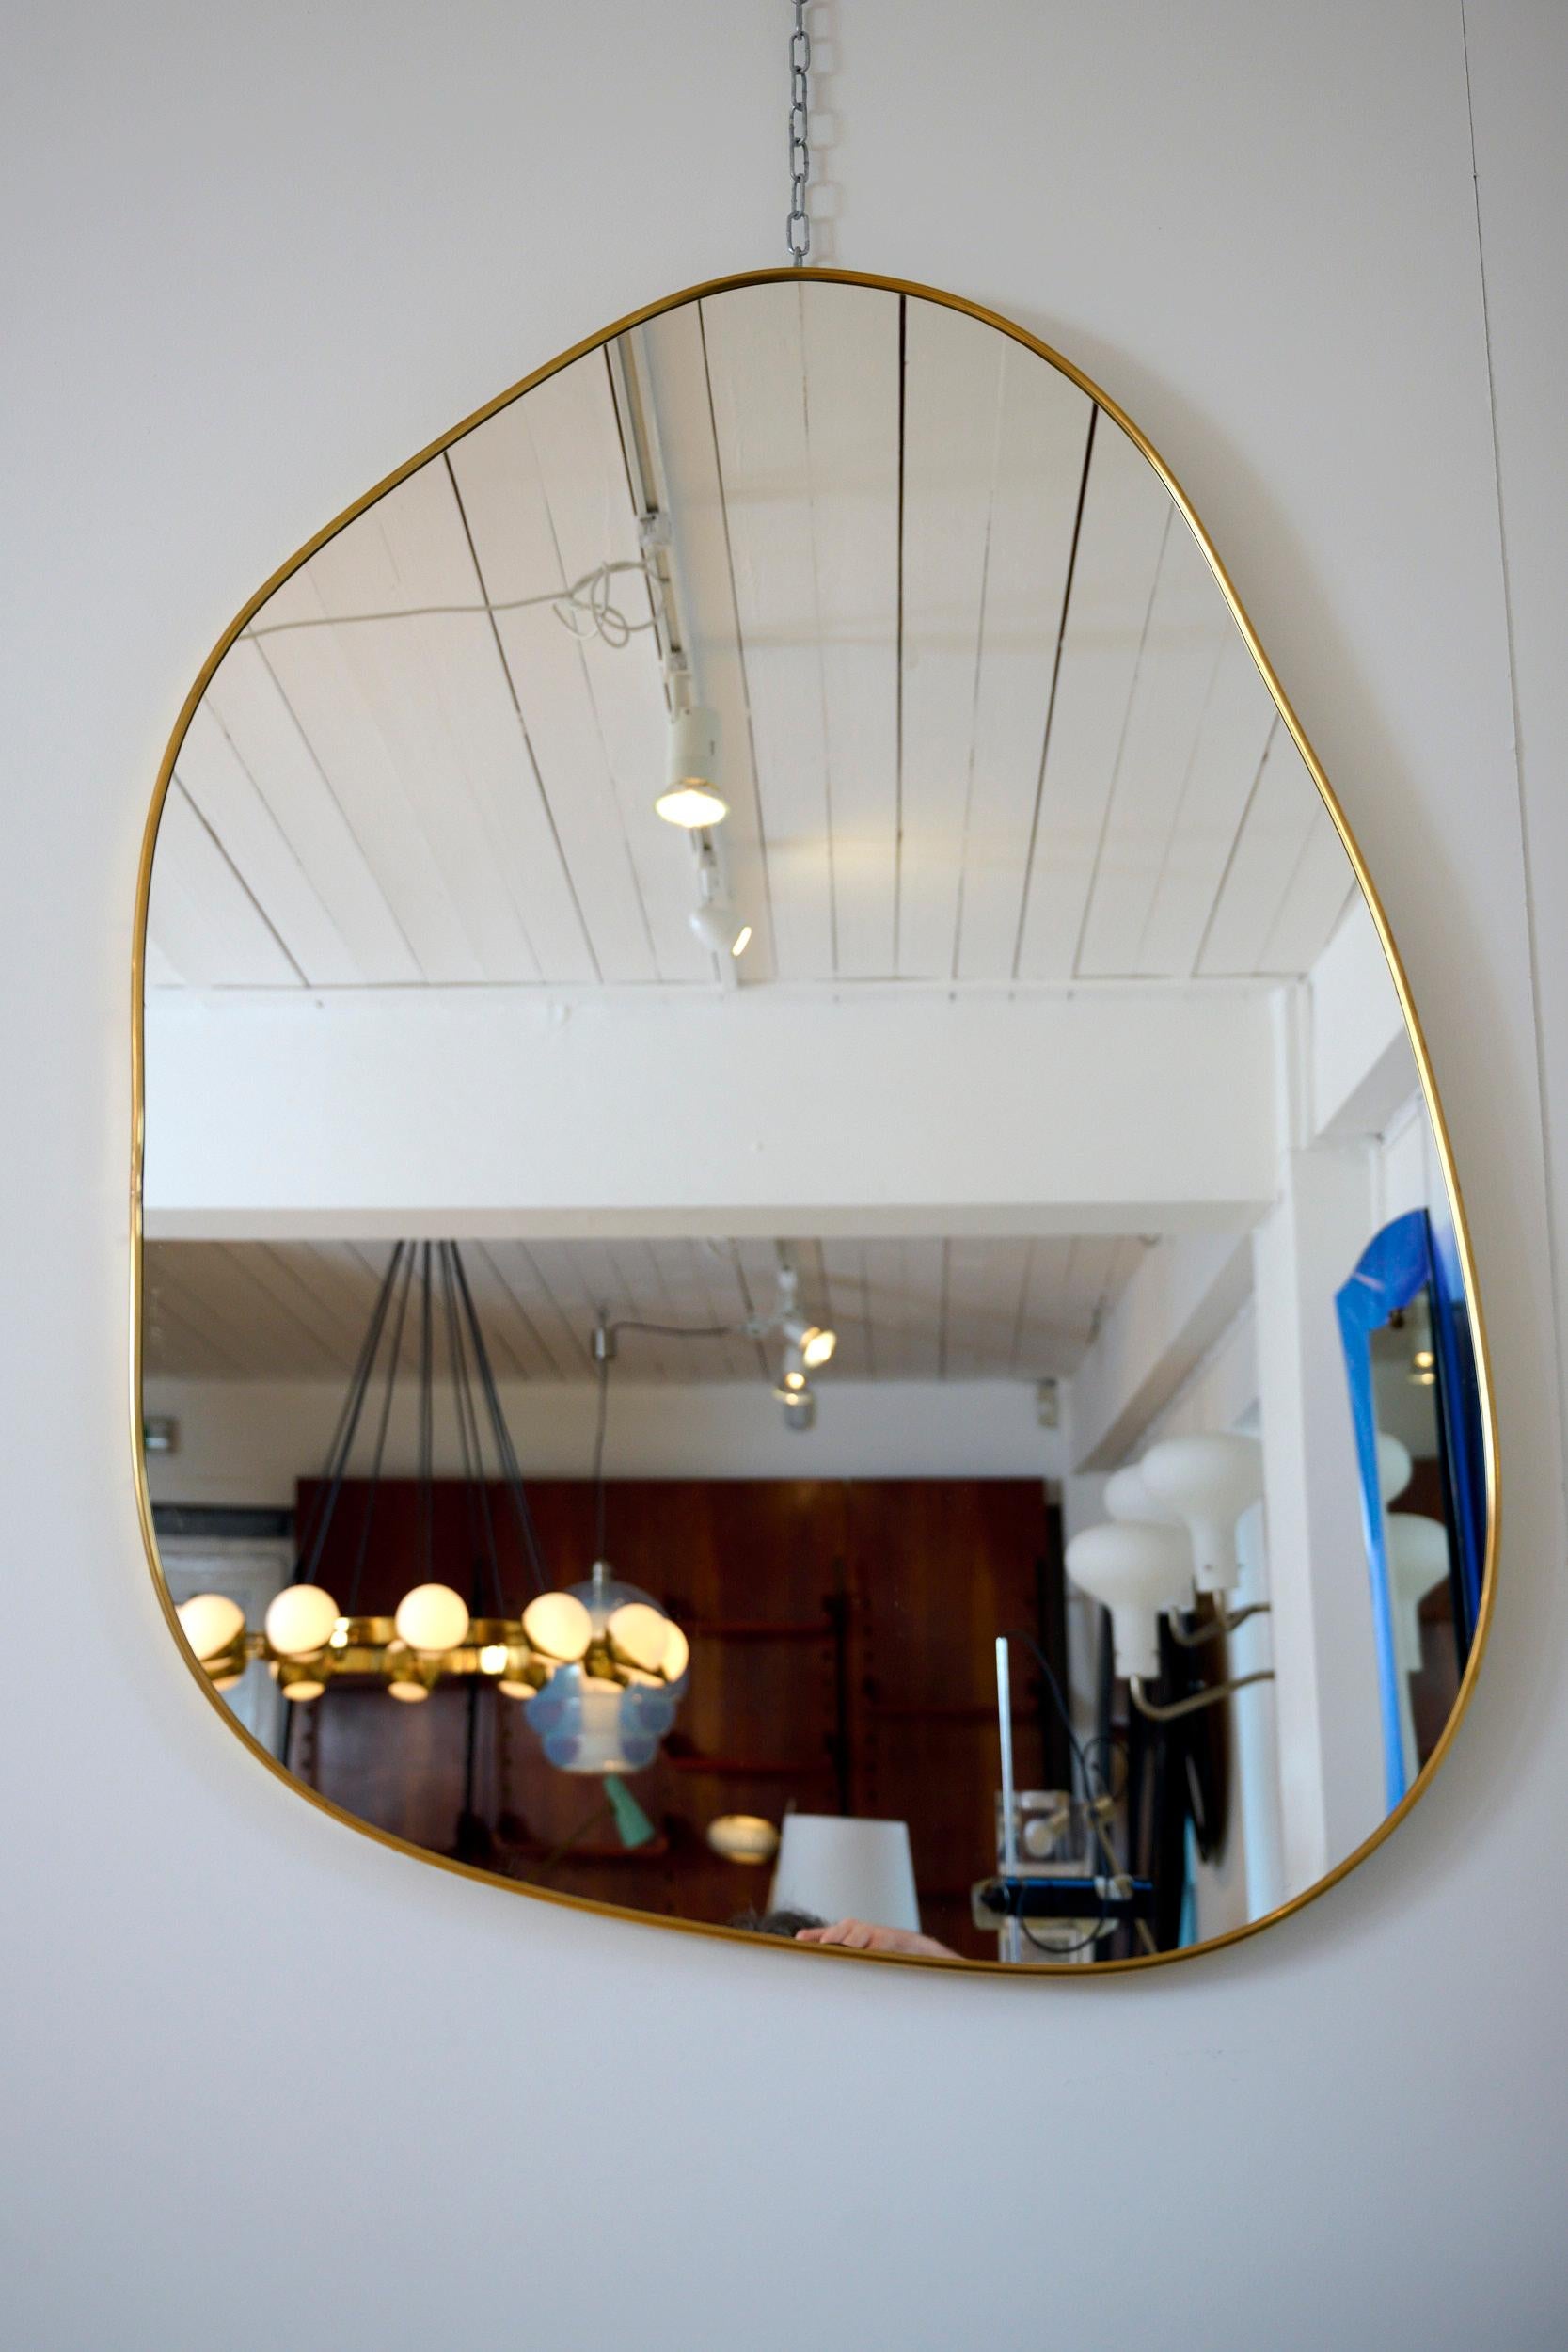 Contemporary curved organic mirror with brass frame.

The design is the Italian brass frame mirror style of the 1950s but with a modern organic form. 

Larger and smaller versions available.